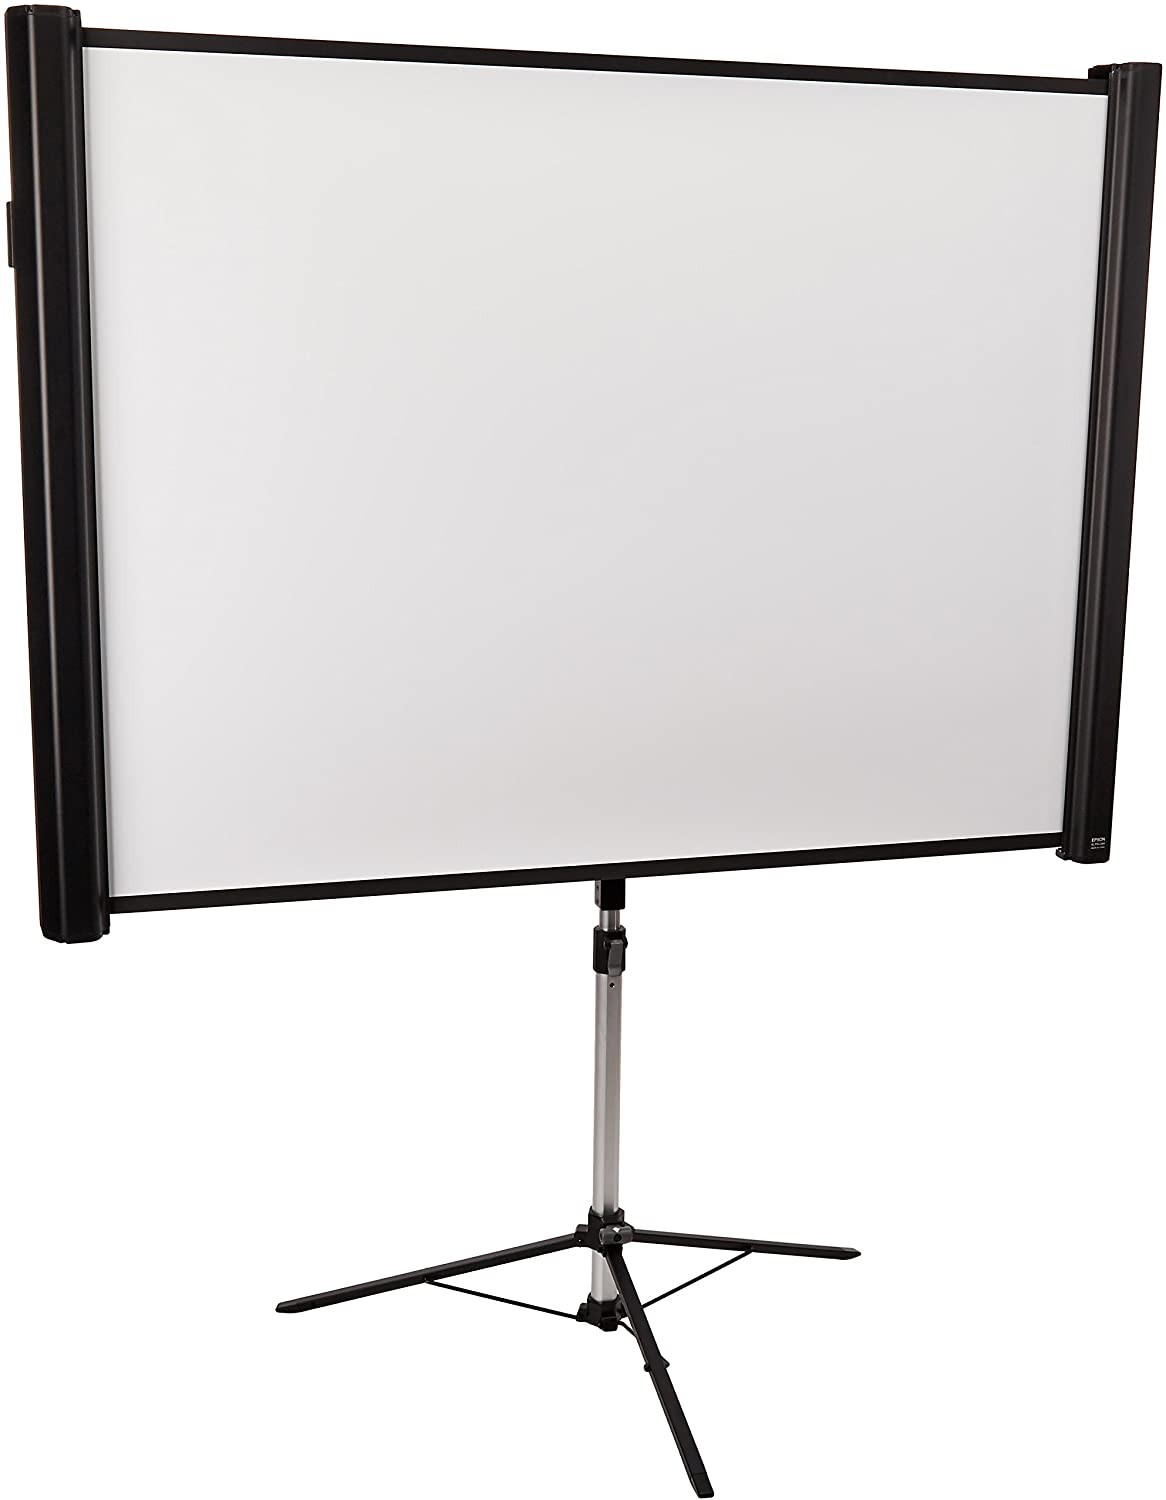 Epson ES3000 Ultra Portable Projection Screen (V12H002S3Y),Black/White